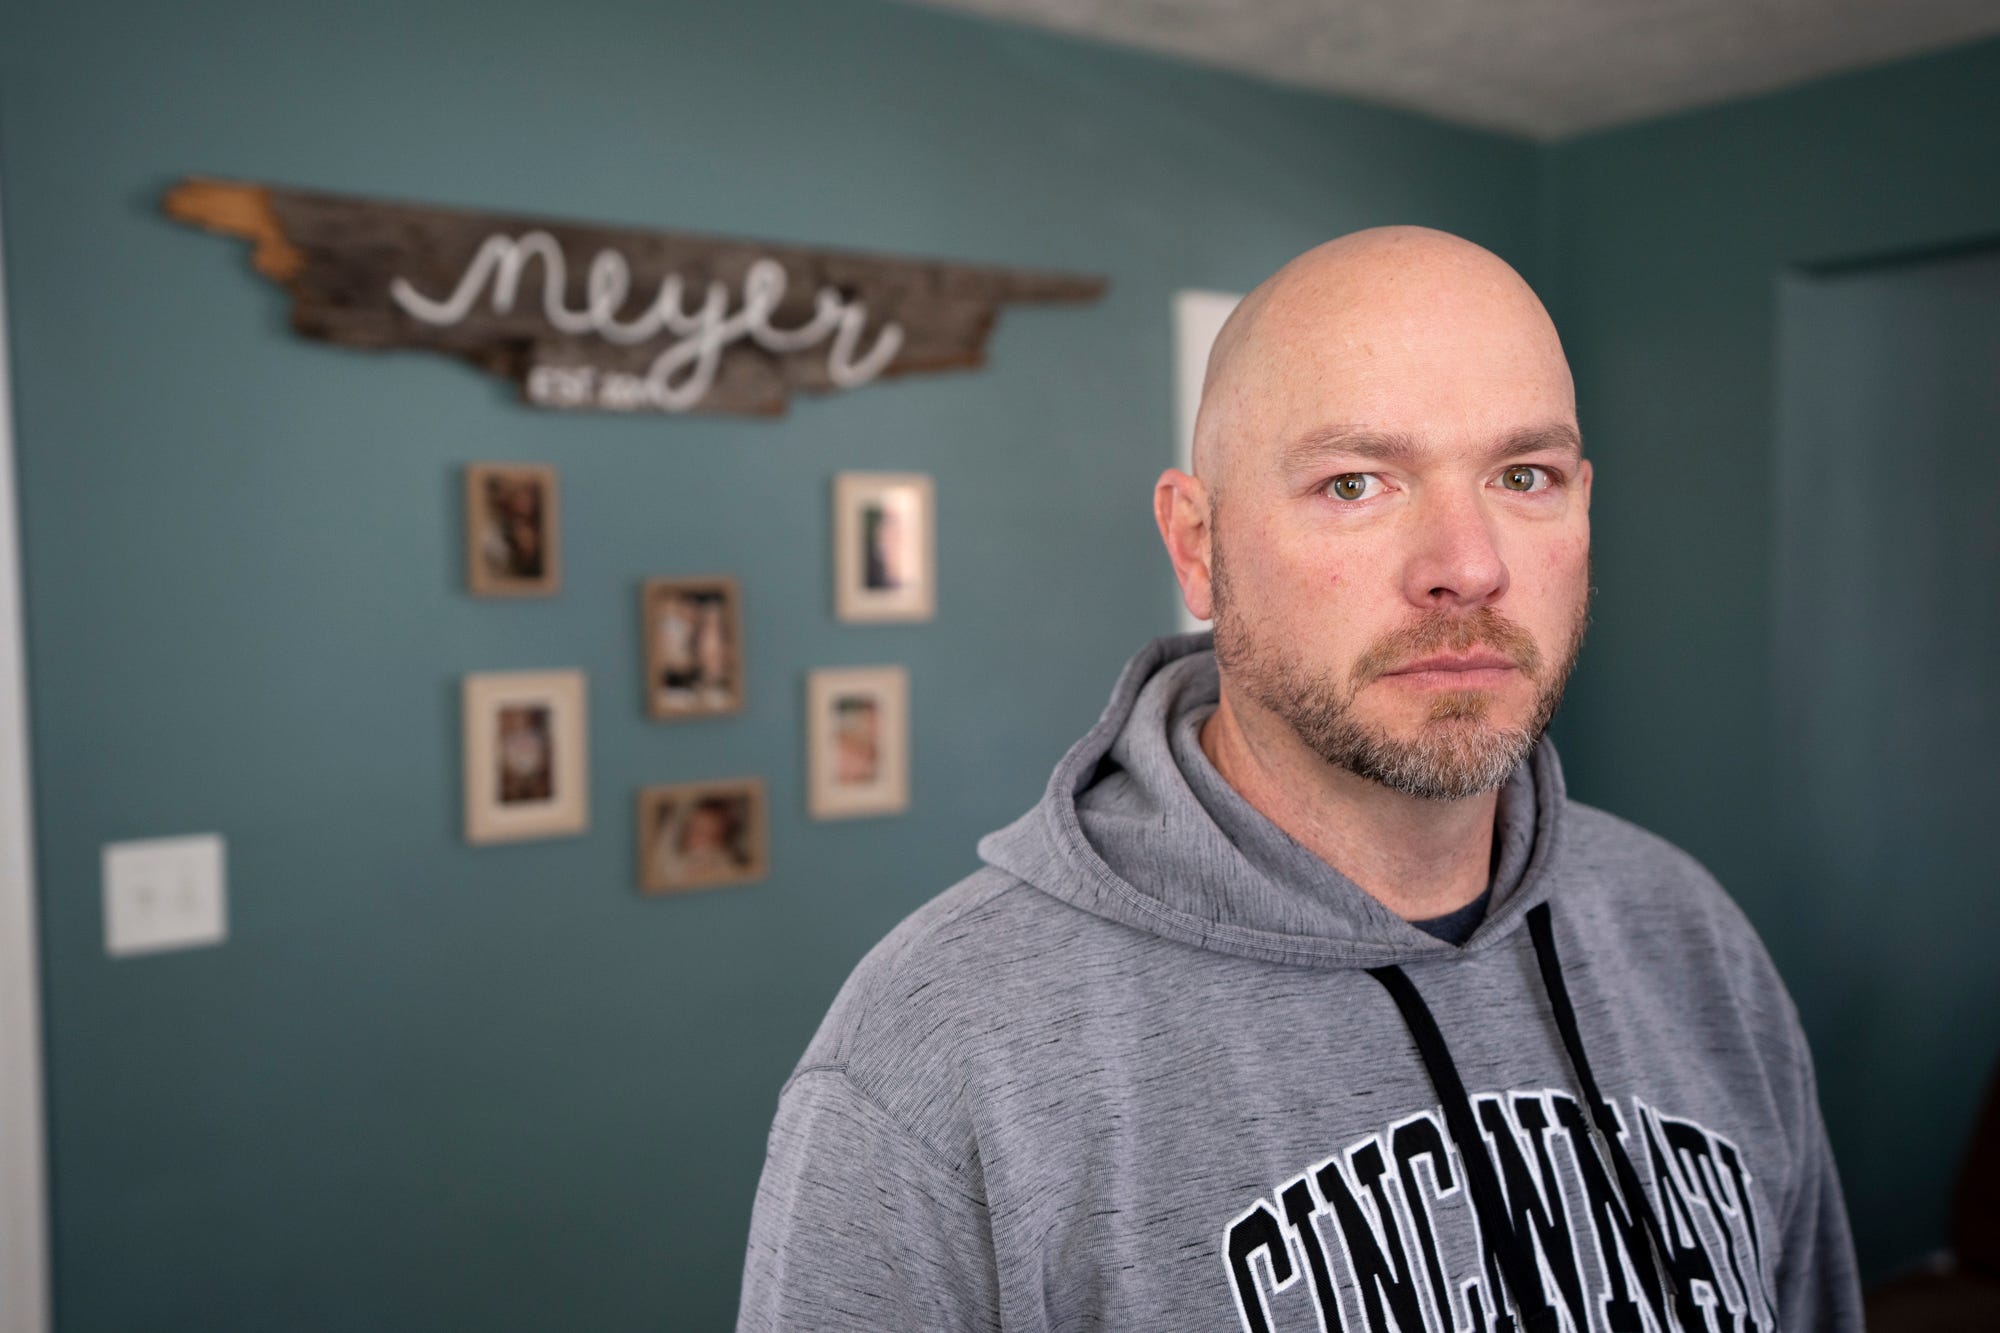 Paul Neyer stands inside his home on Sunday, Feb. 12, 2023. Paul Neyer decided to come forward with abuse allegations against Father Geoff Drew almost 30 years after he was abused. 